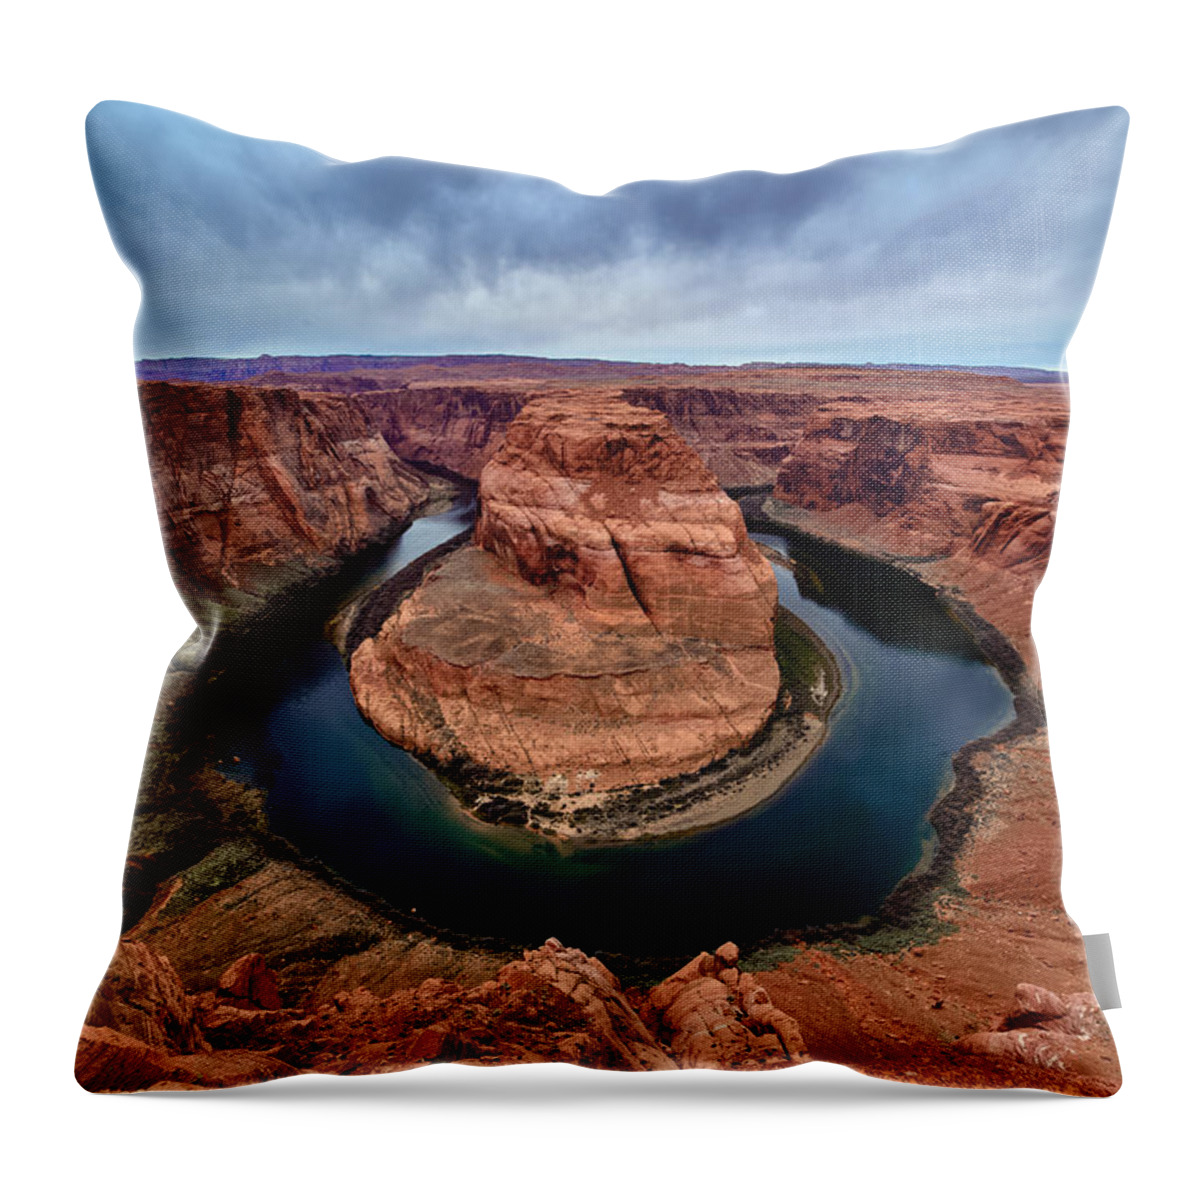 Horseshoe Bend Throw Pillow featuring the photograph Horseshoe Bend by Mike Ronnebeck